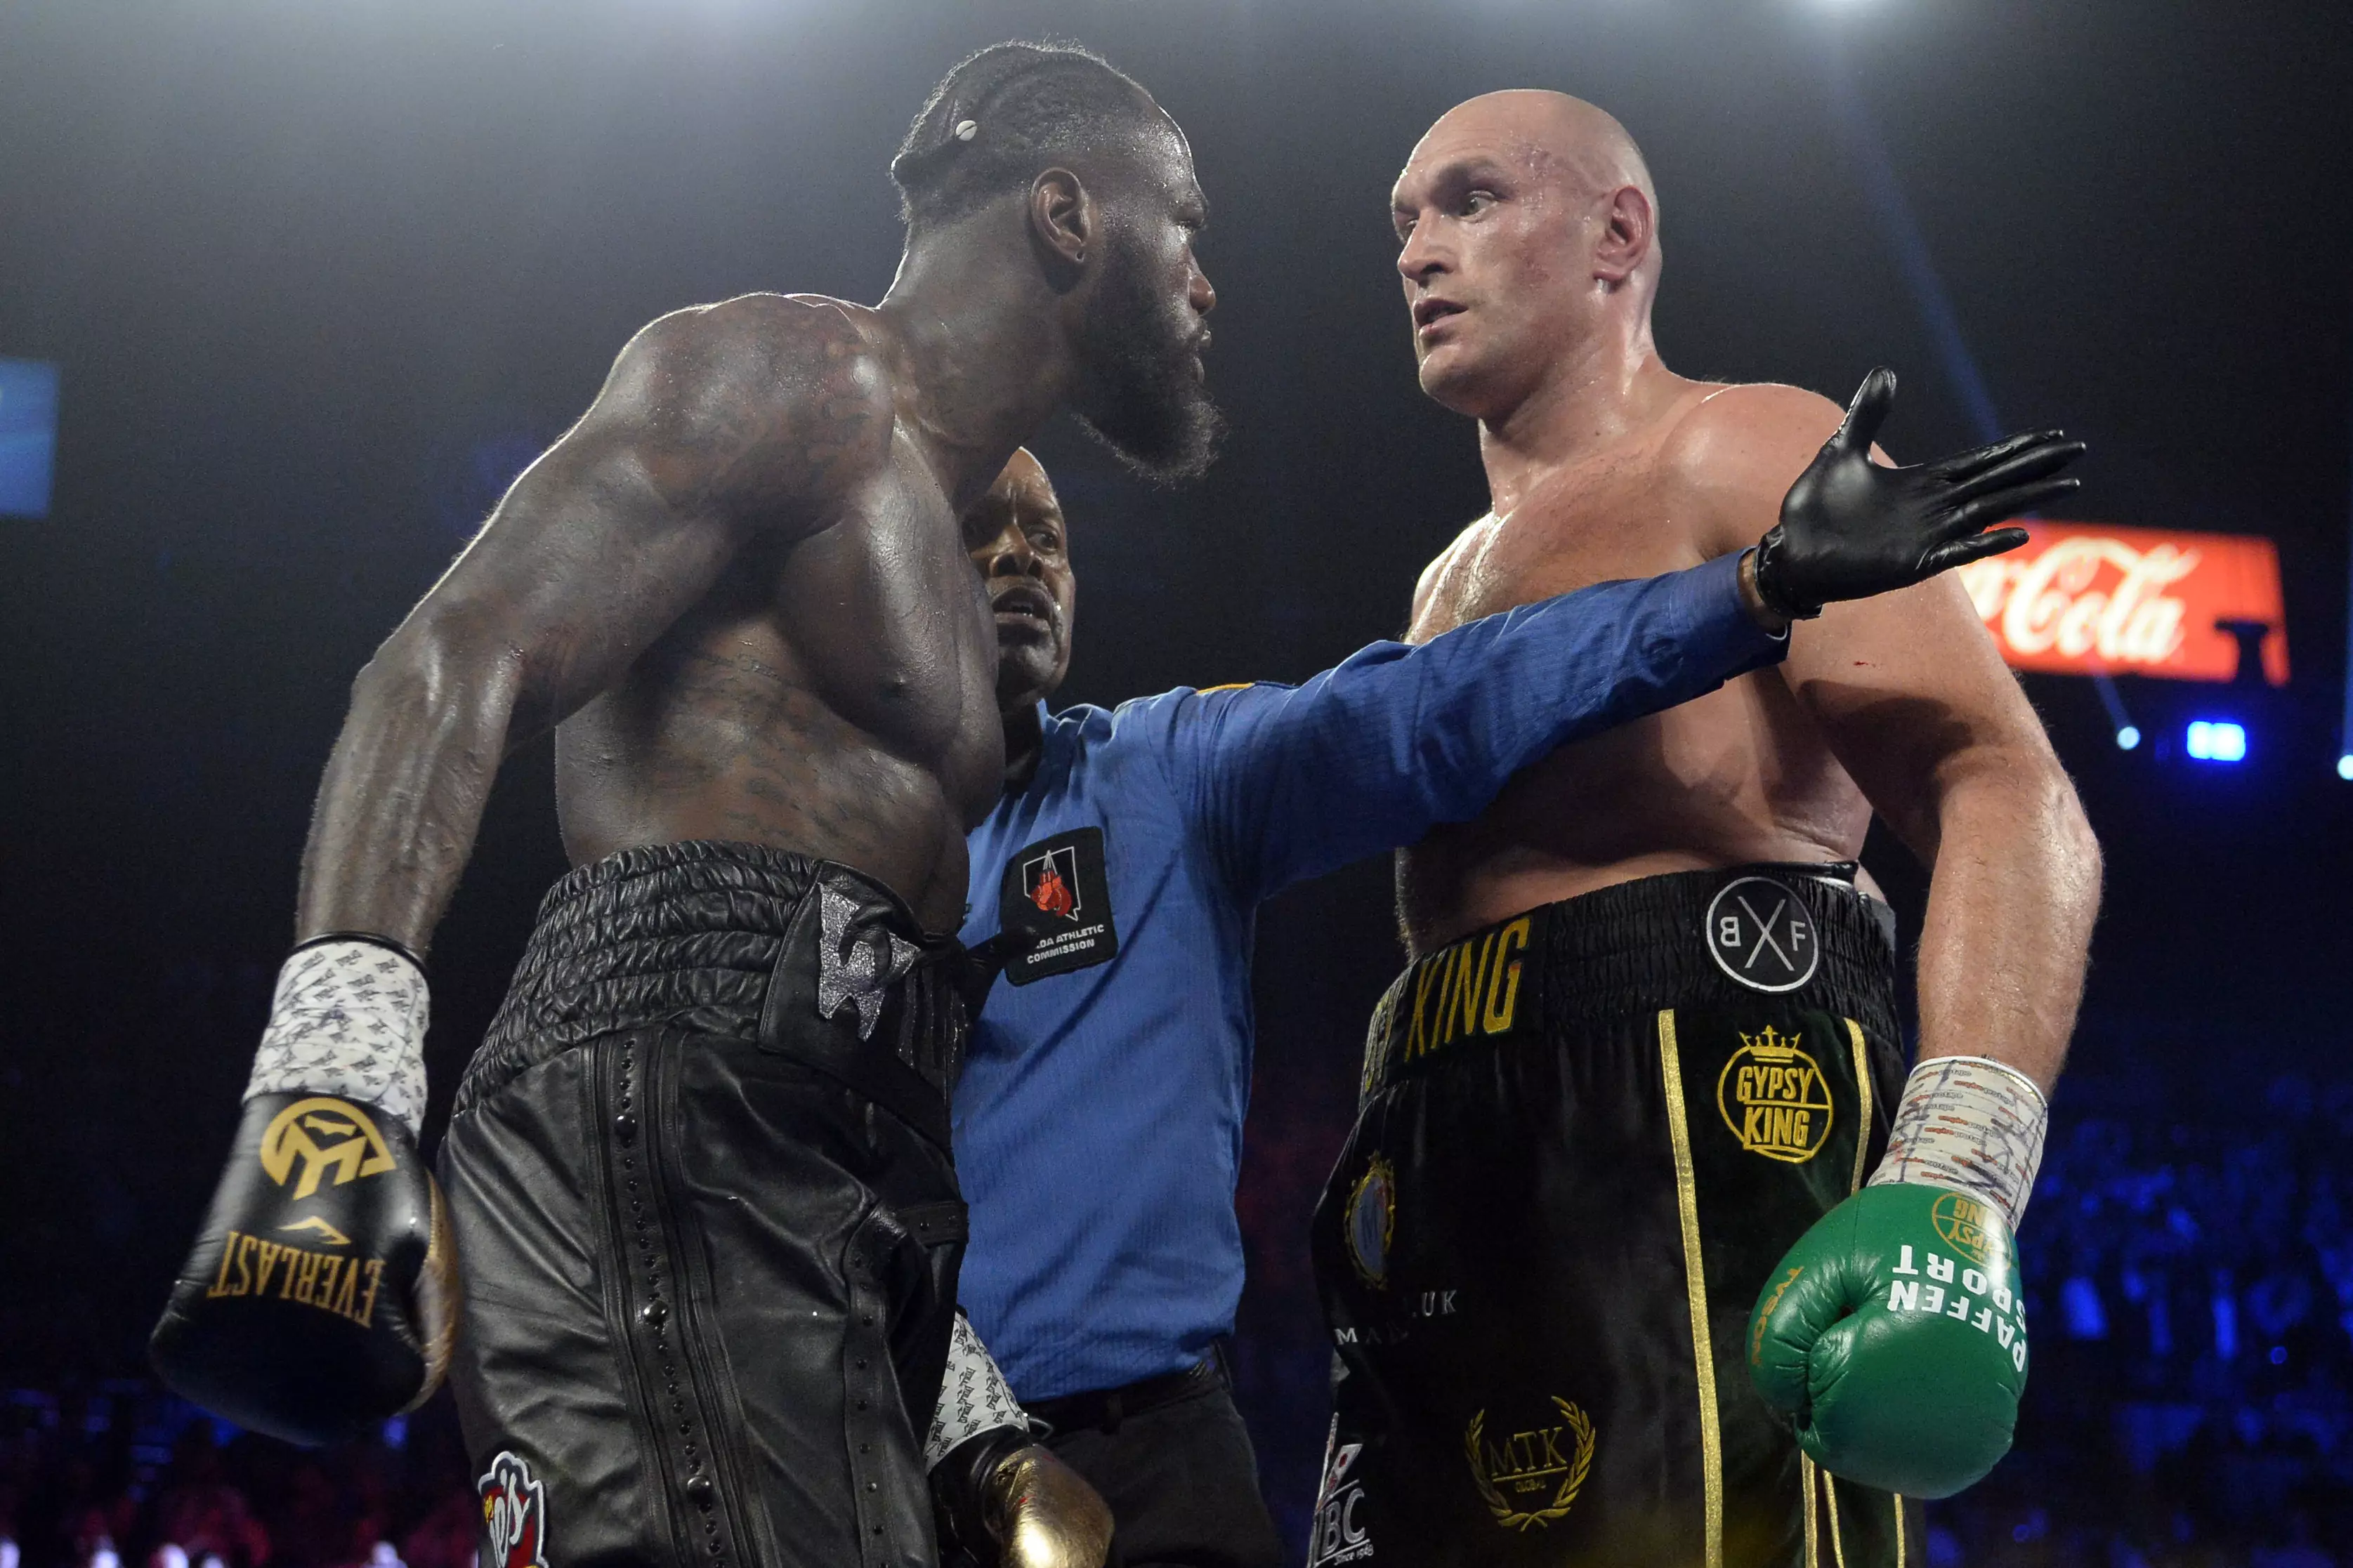 Tyson Fury's proposed trilogy bout with Deontay Wilder looks like it's over.